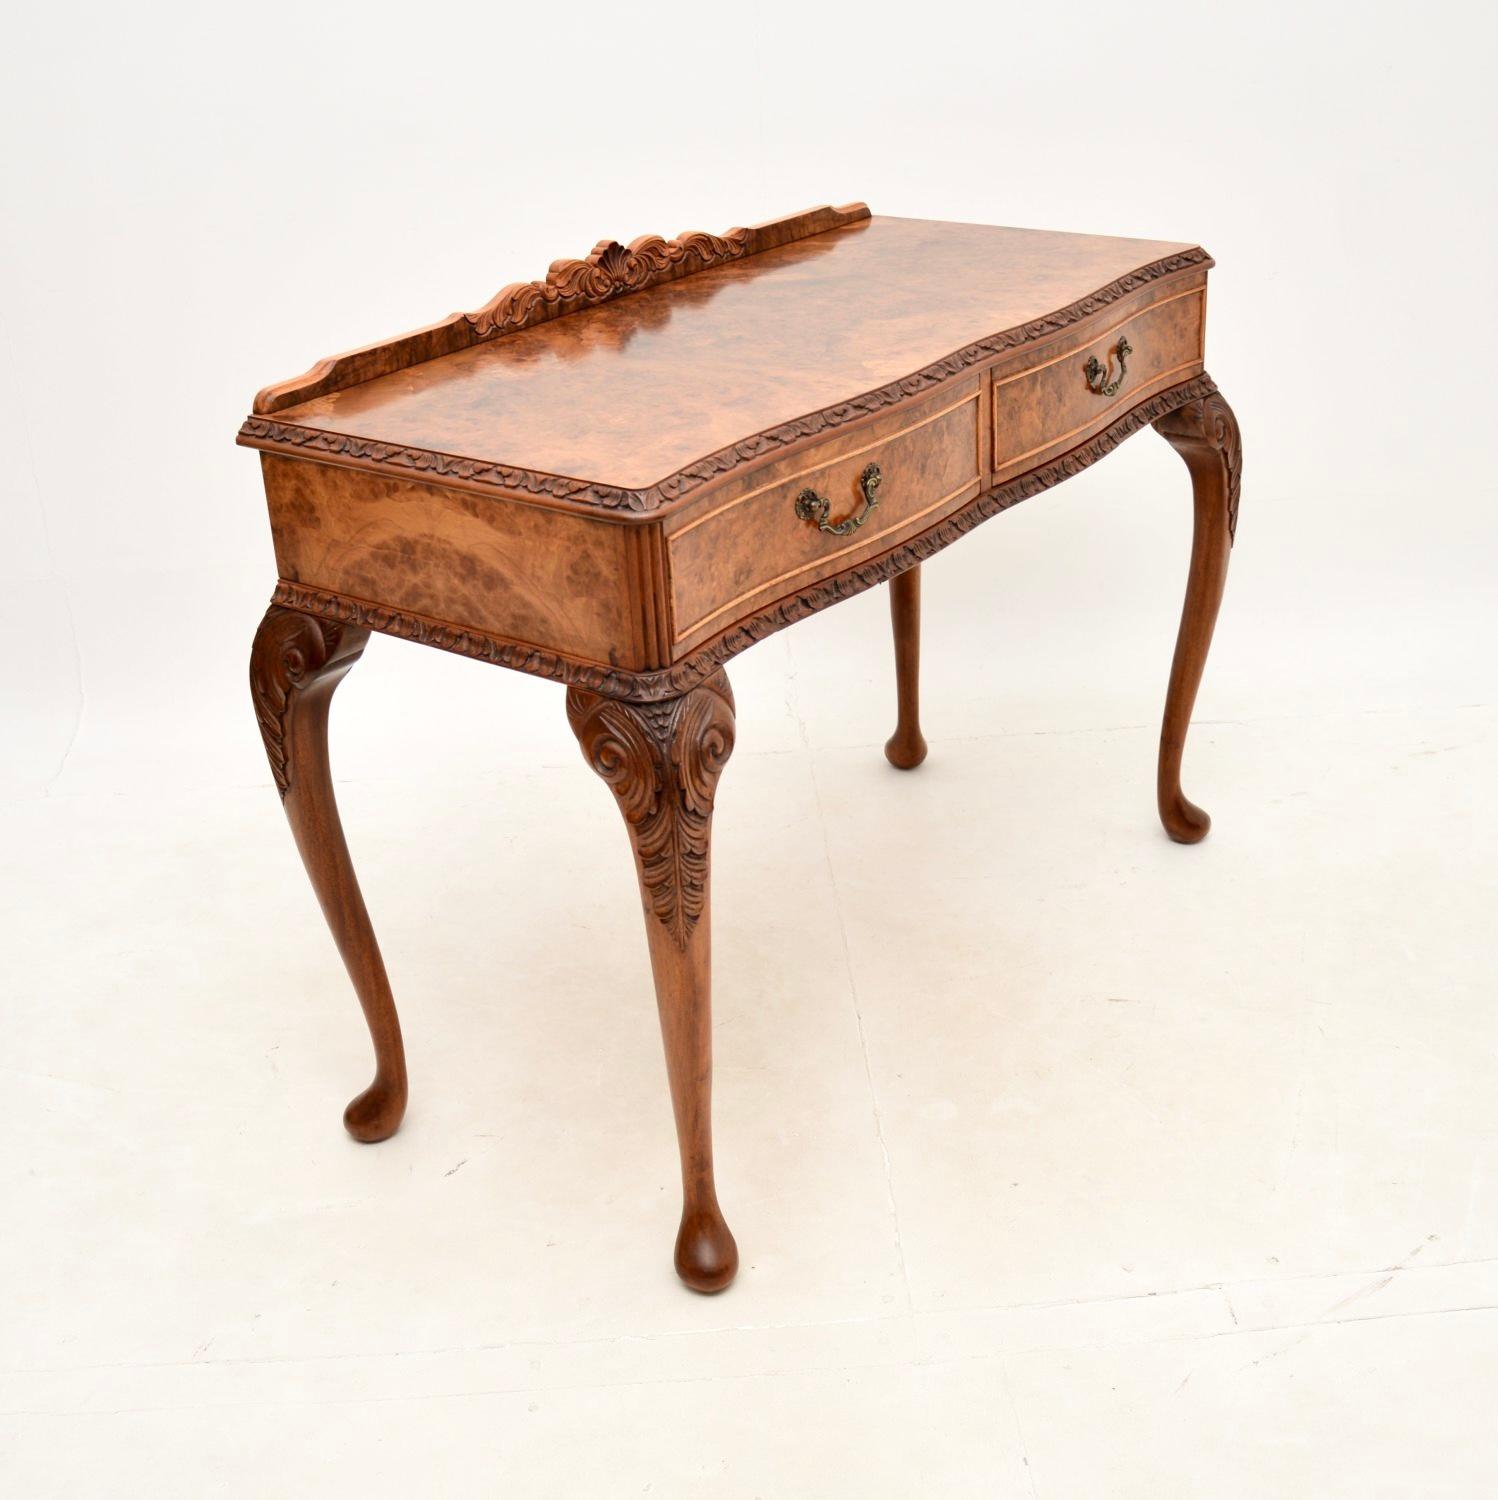 A beautifully made antique burr walnut console / side table. This was made in England, it dates from around the 1930’s.

The quality is fantastic, this has intricate carving all round the edges and gorgeous burr walnut grain patterns. It sits on